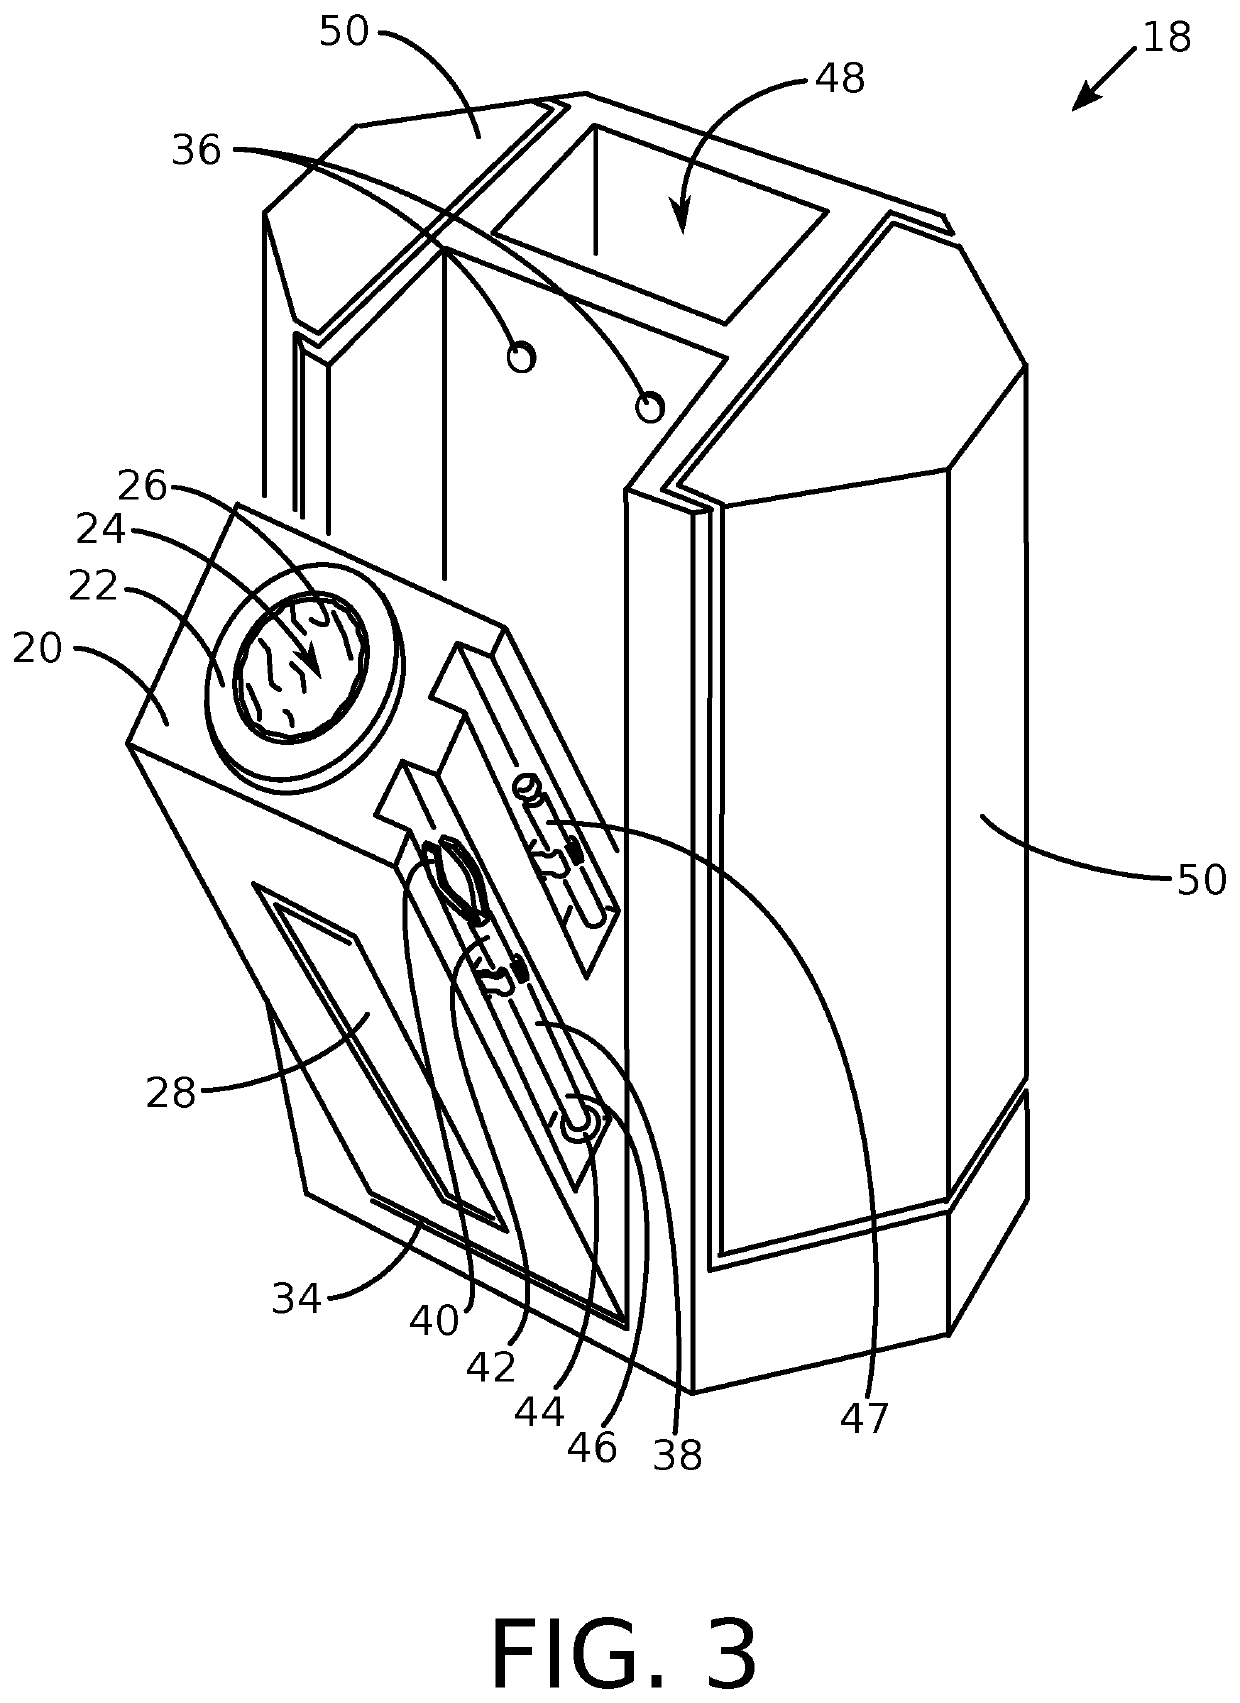 Apparatus for preparing a personal smokable product